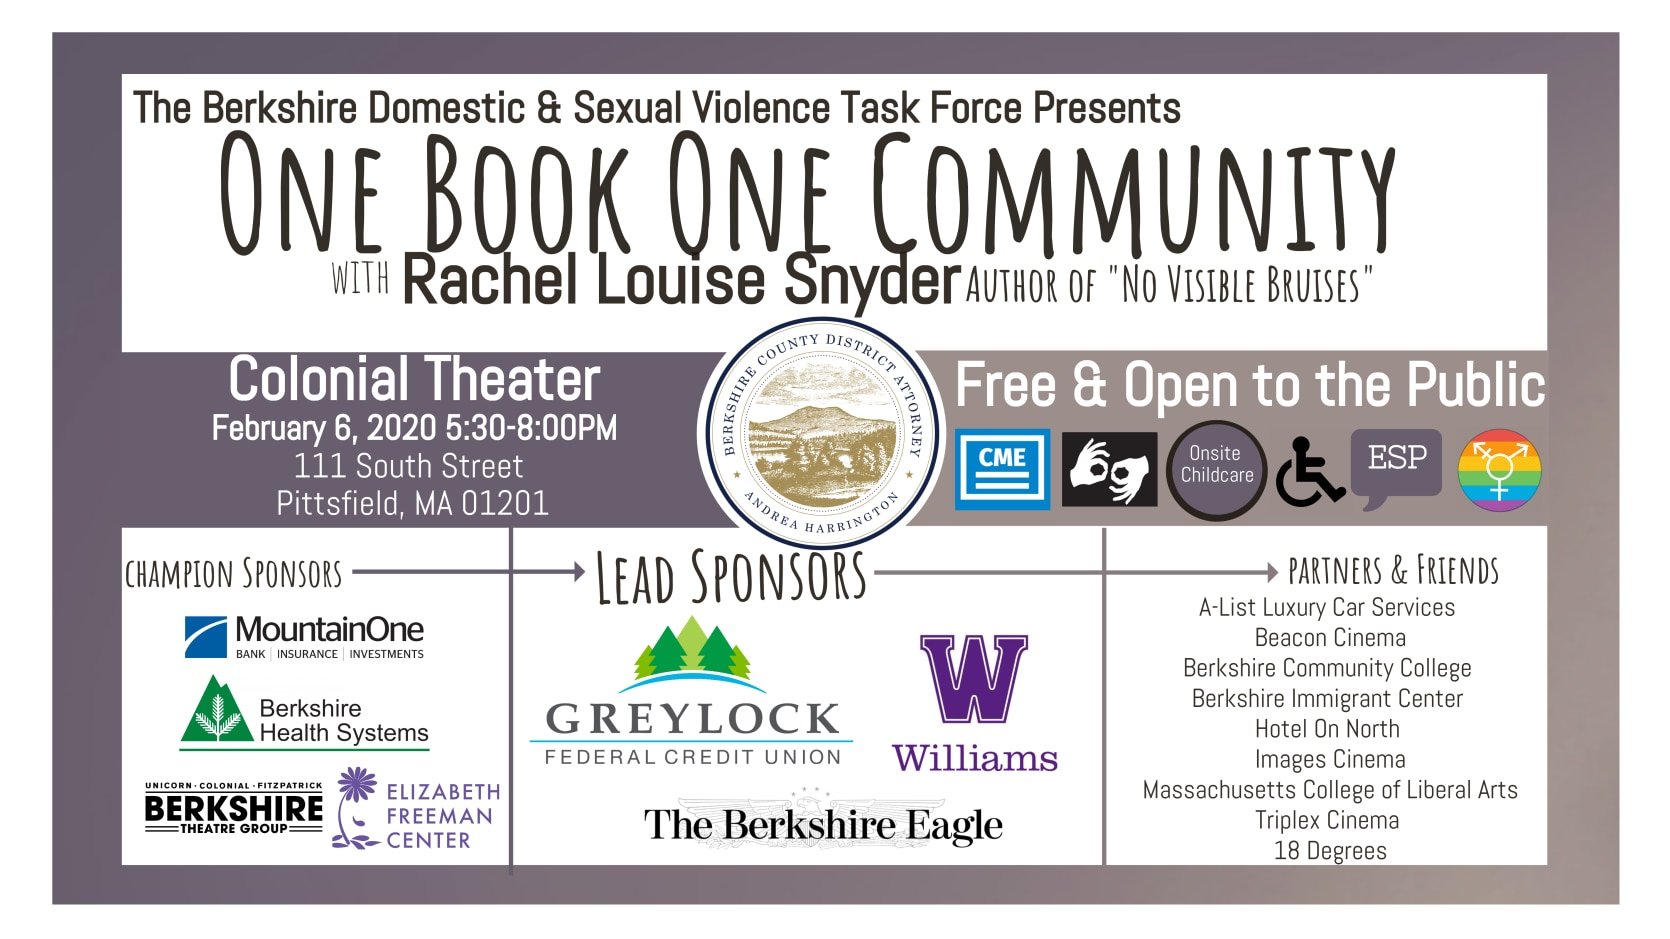 The One Book One Community project culminates with Rachel Louise Snyder speaking at the Colonial Theater on February 6.